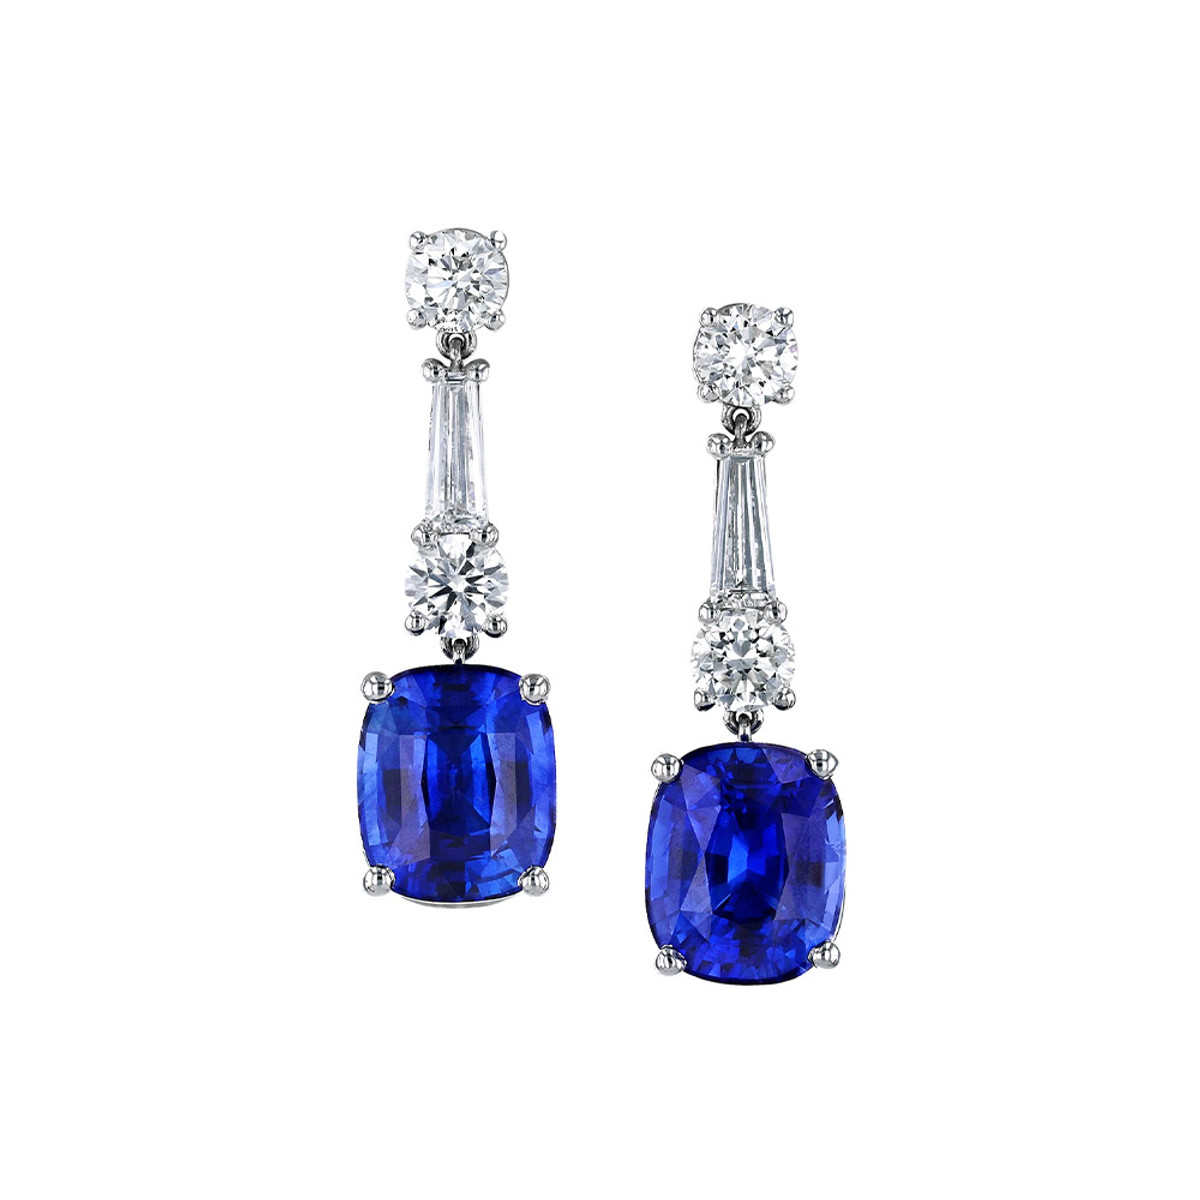 Hyde Park Collection Platinum Sapphire and Diamond Earrings-59730 Product Image